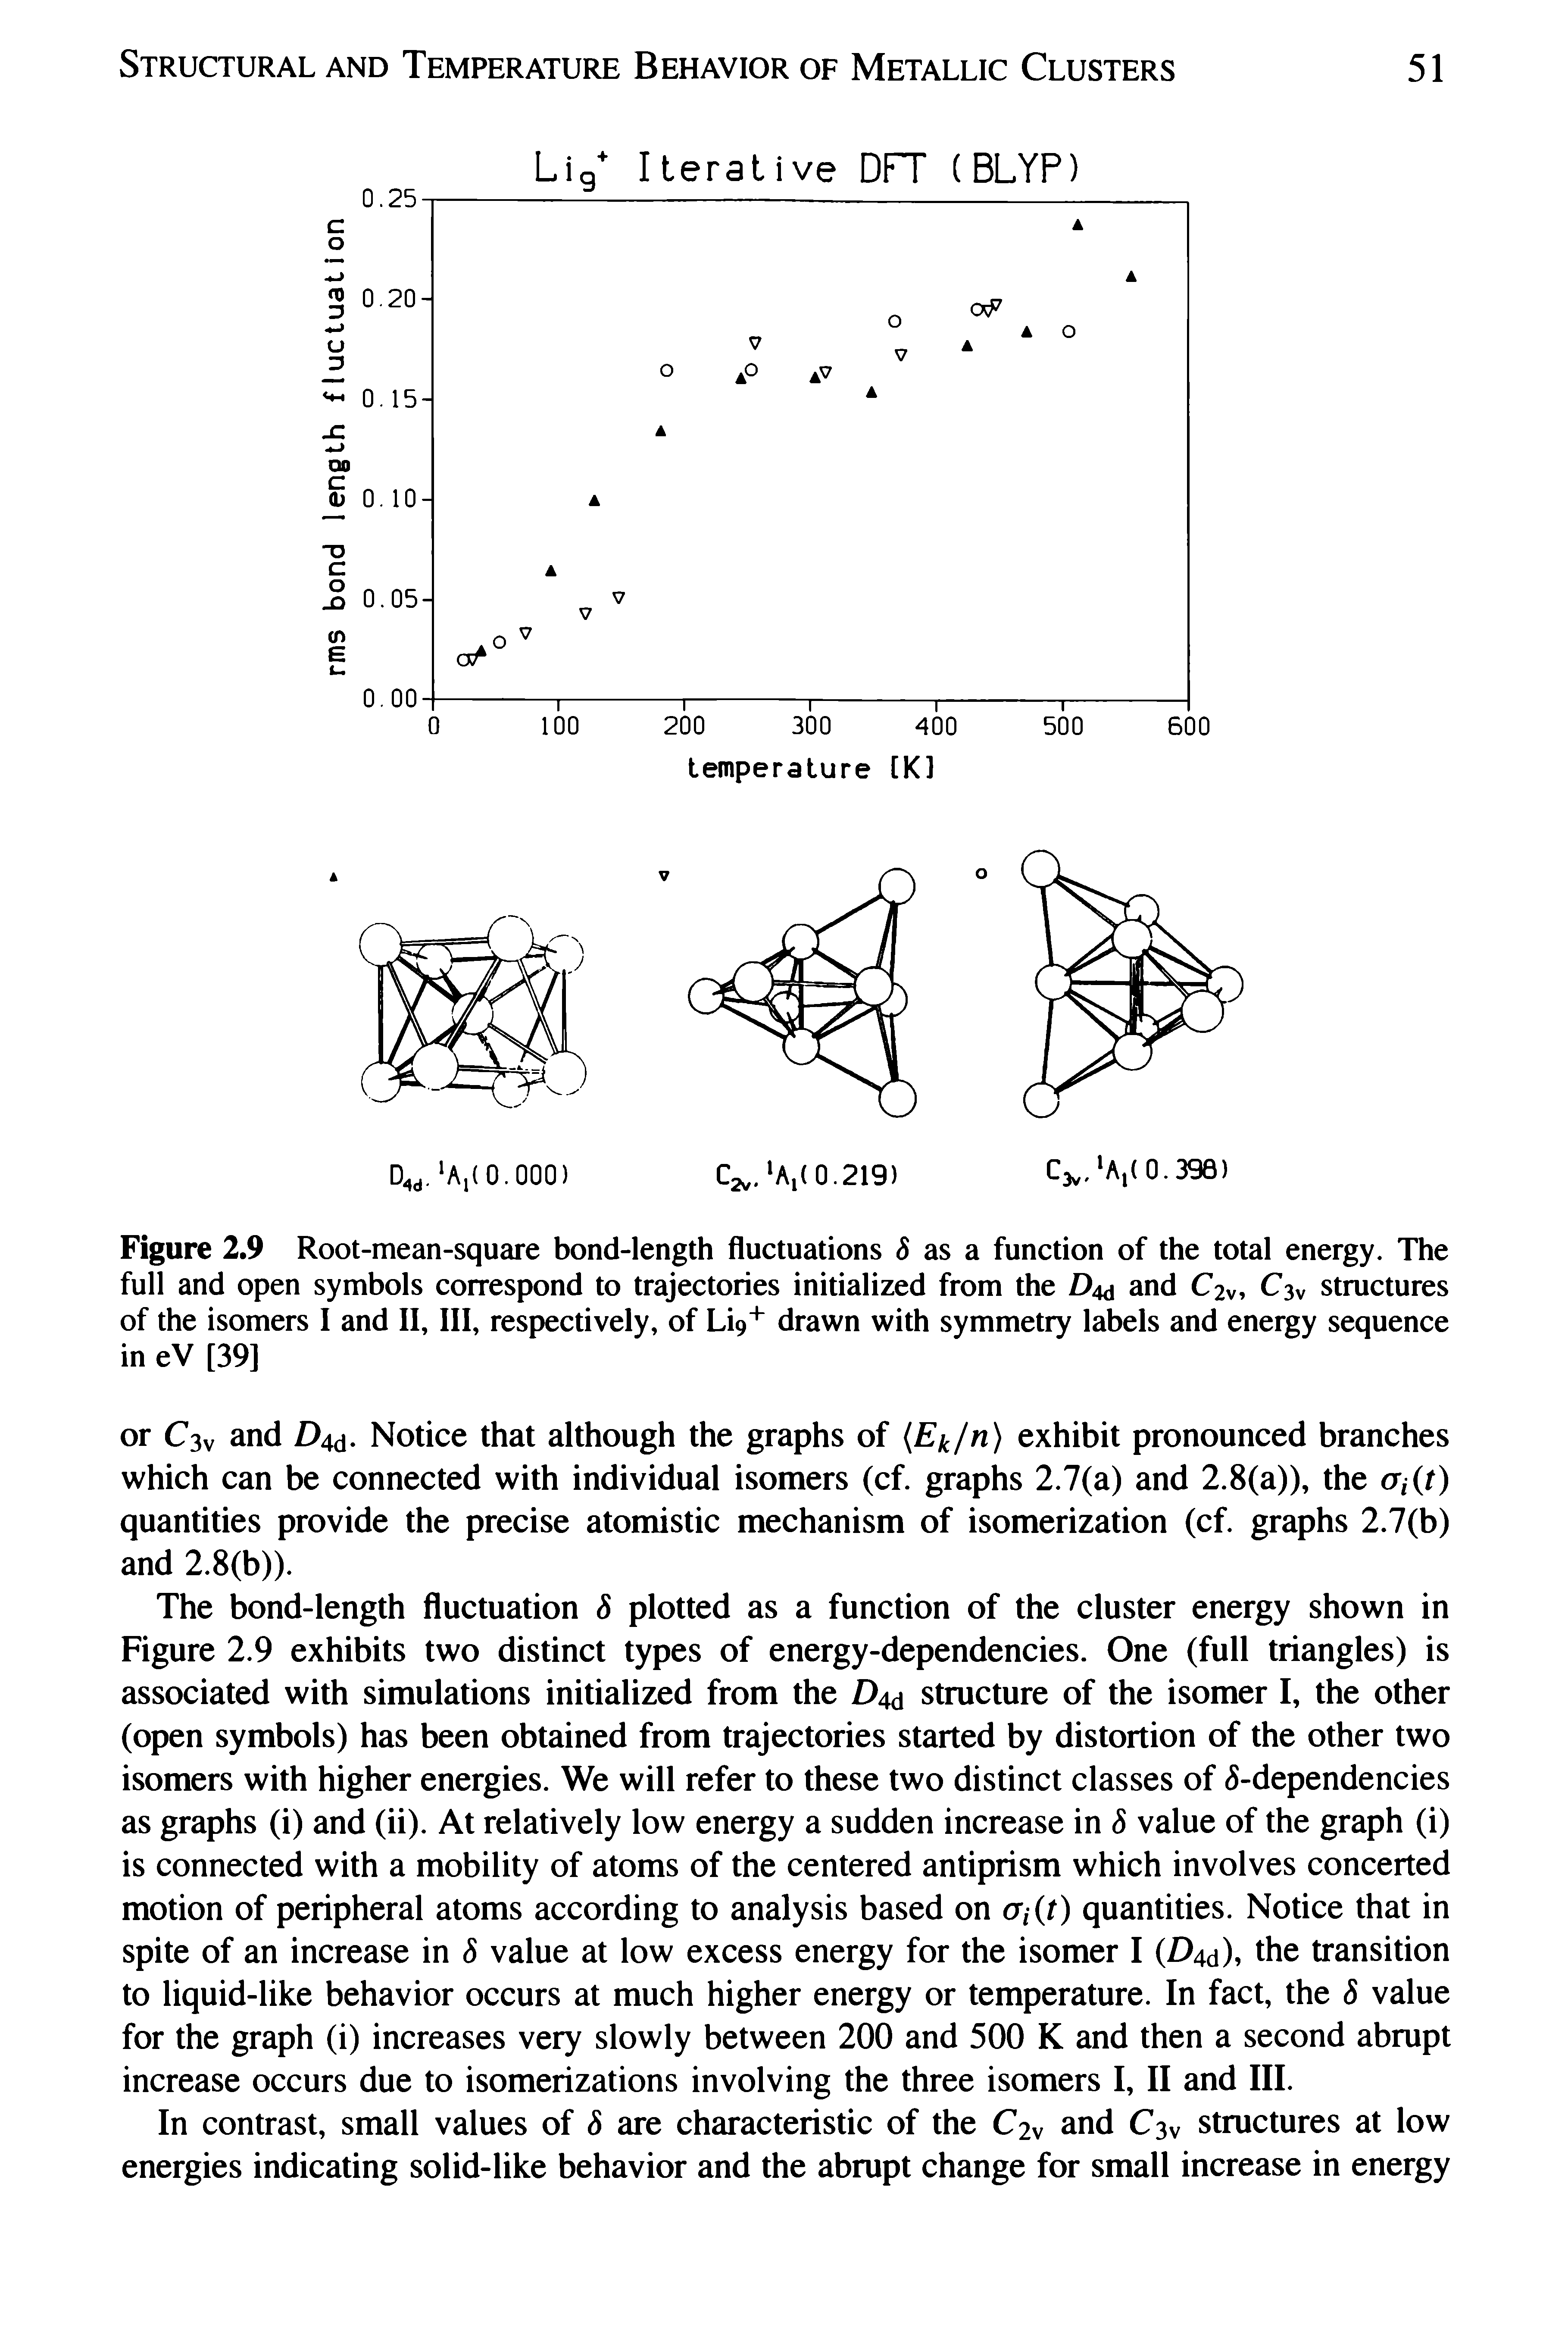 Figure 2.9 Root-mean-square bond-length fluctuations 5 as a function of the total energy. The full and open symbols correspond to trajectories initialized from the and C2v, structures of the isomers I and II, III, respectively, of Li9 drawn with symmetry labels and energy sequence in eV [39]...